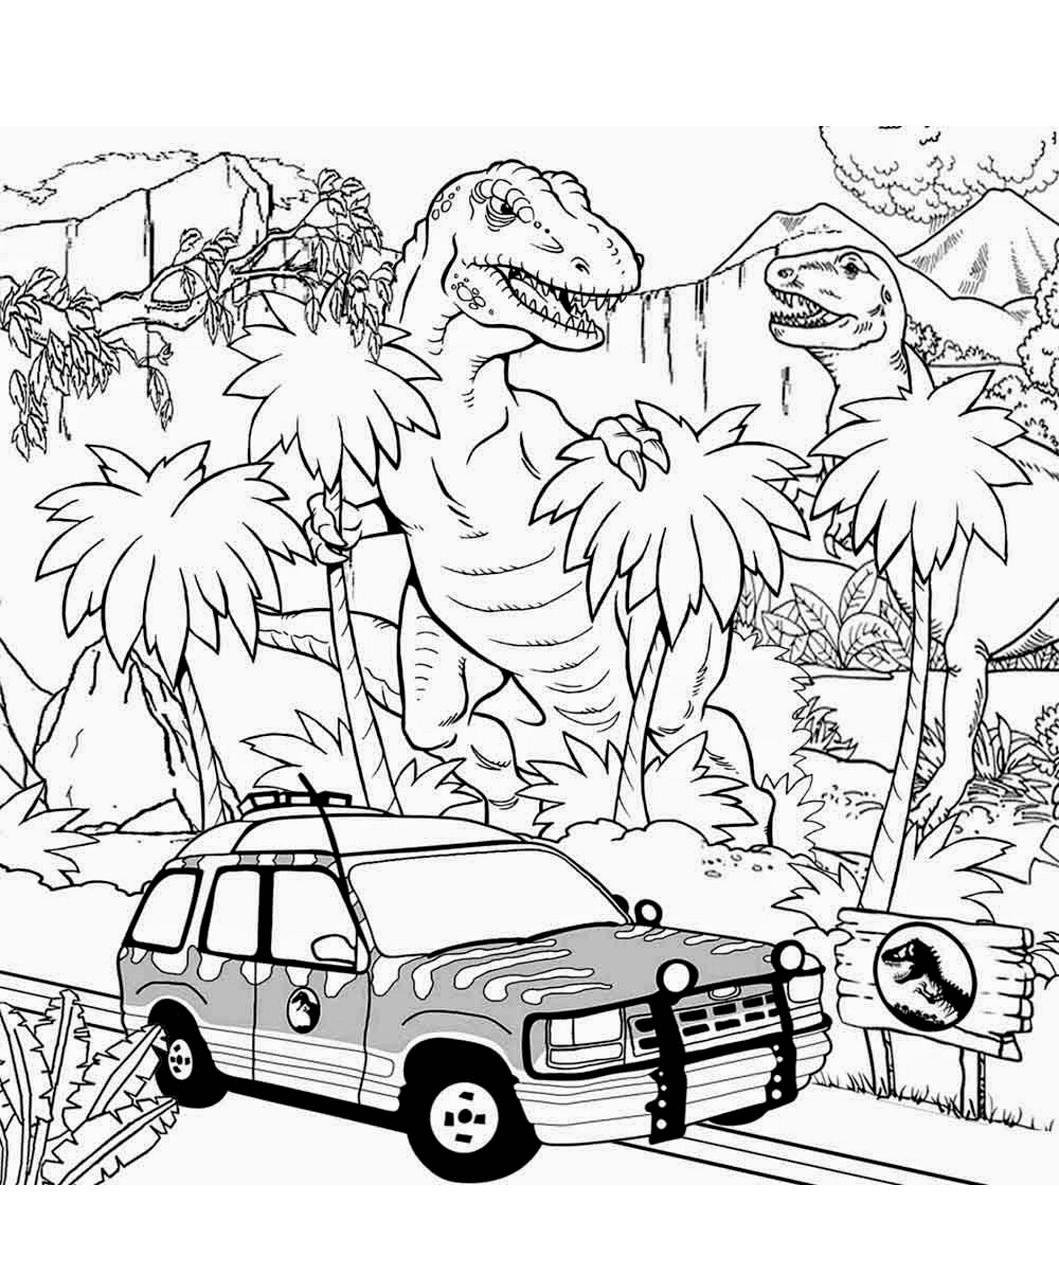 Jurassic World Coloring Pages   Free Printable Coloring Pages for Kids